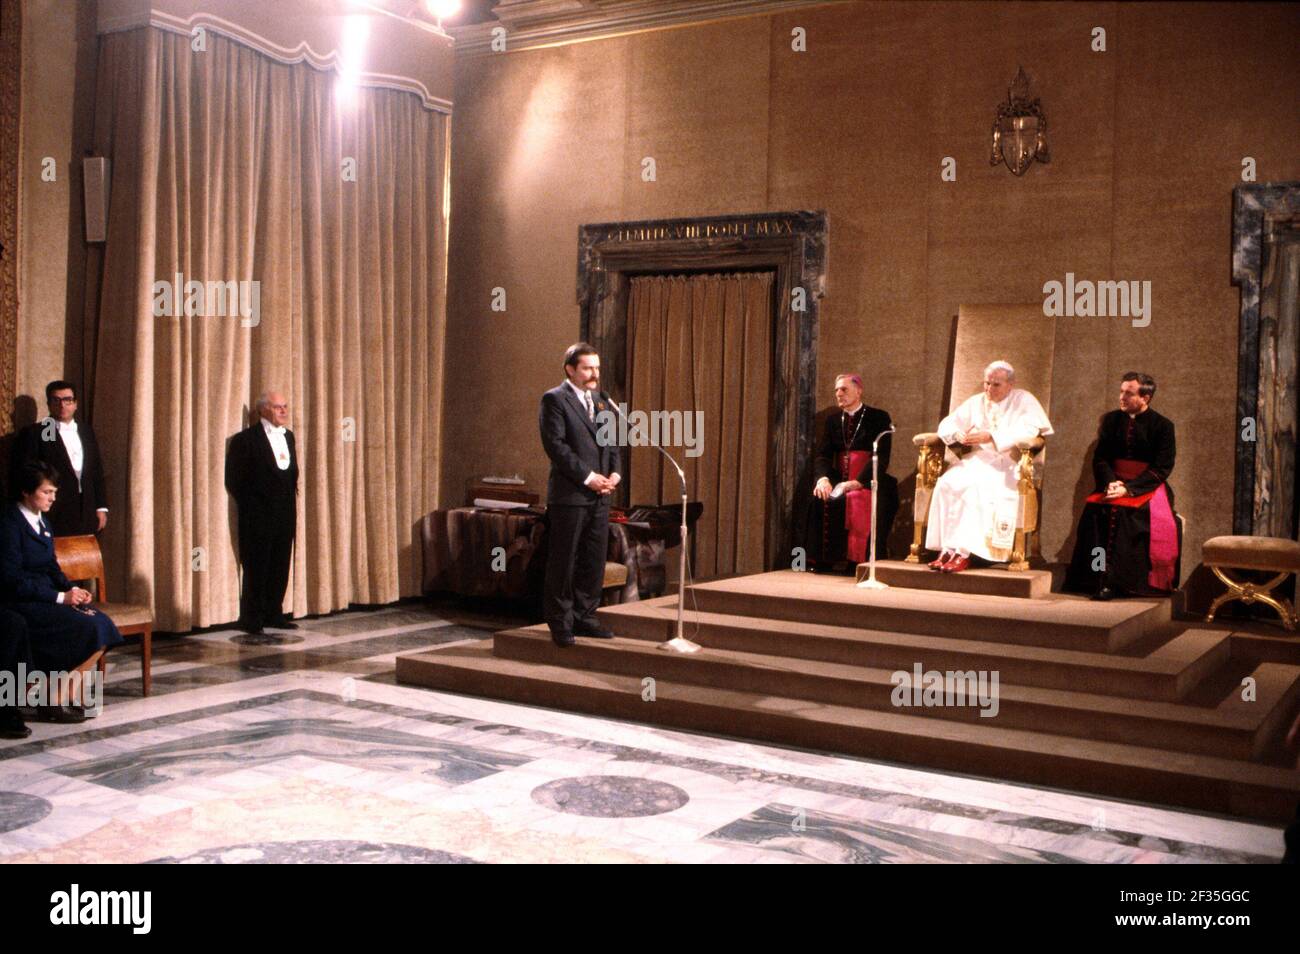 Pope John Paul Ii 1981 High Resolution Stock Photography and Images - Alamy